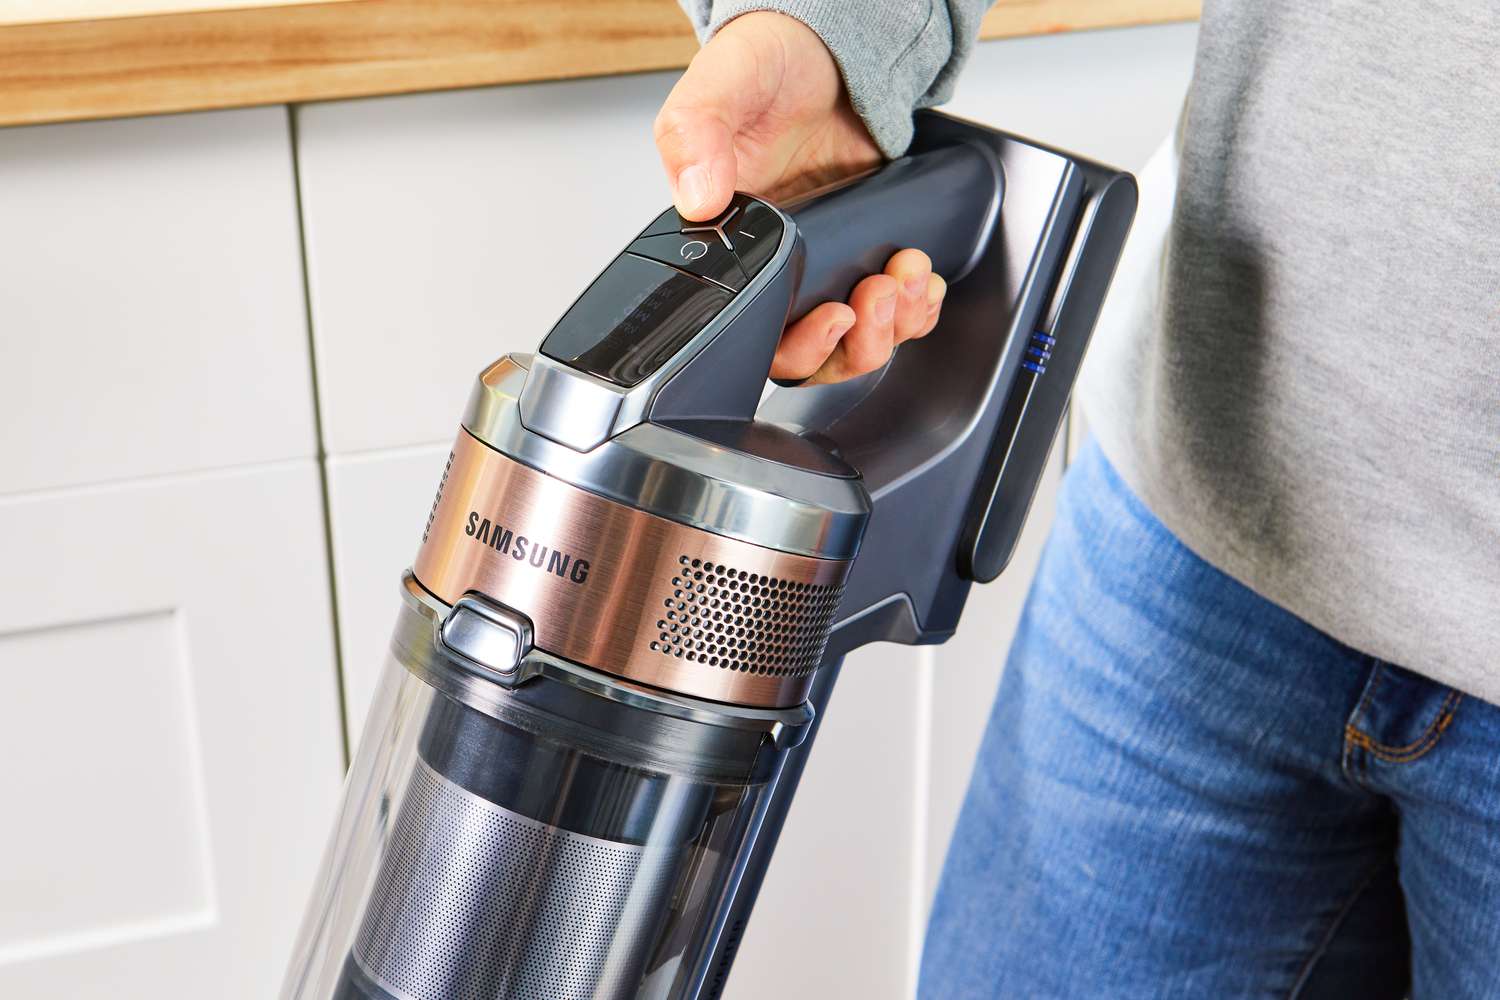 Person pressing a power button of the Samsung Jet 75 Cordless Stick Vacuum